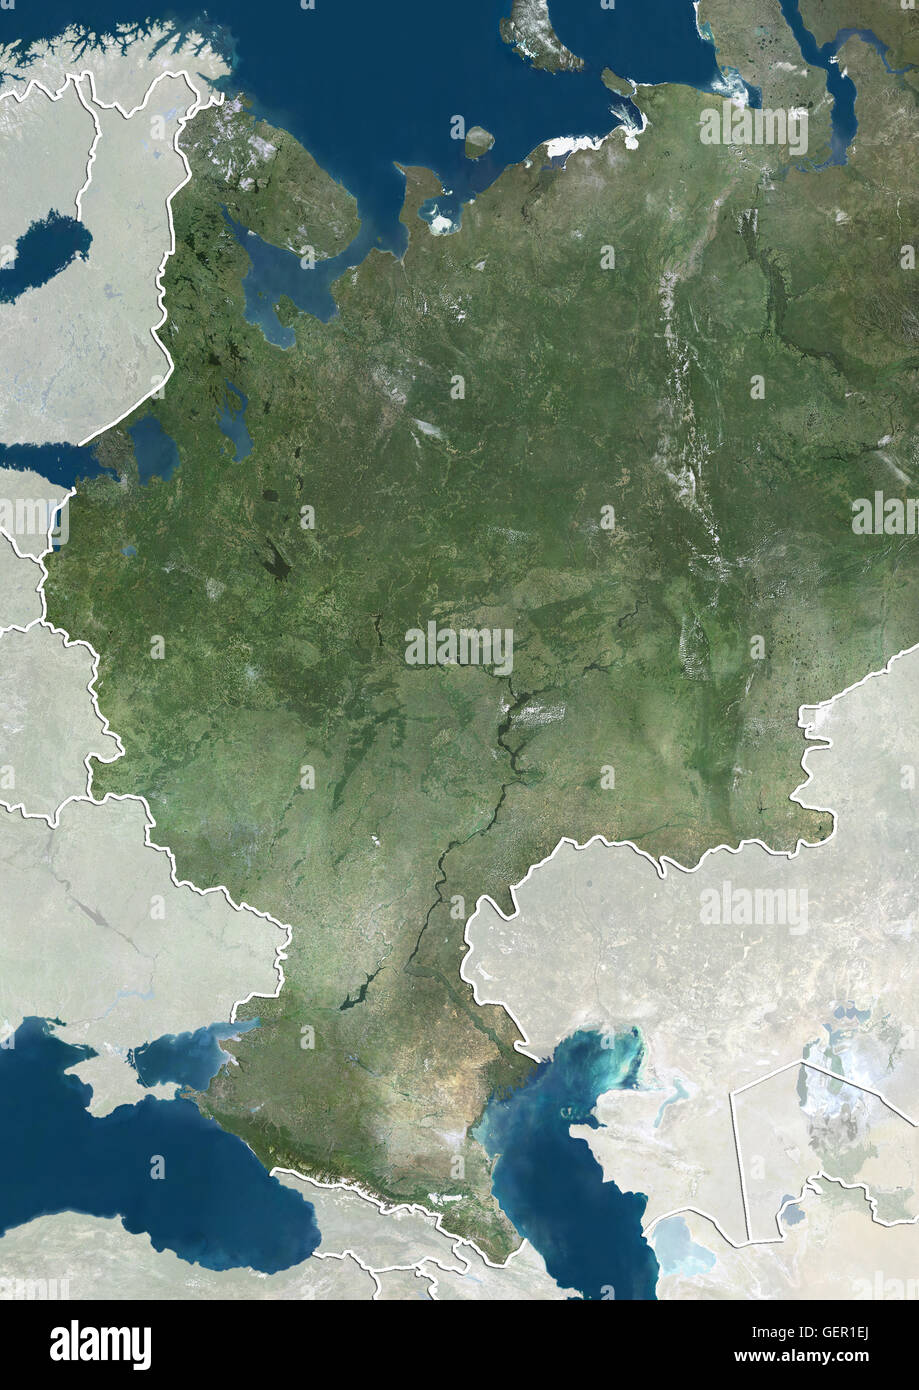 Satellite view of Central Russia (with country boundaries and mask). This image was compiled from data acquired by Landsat satellites. Stock Photo